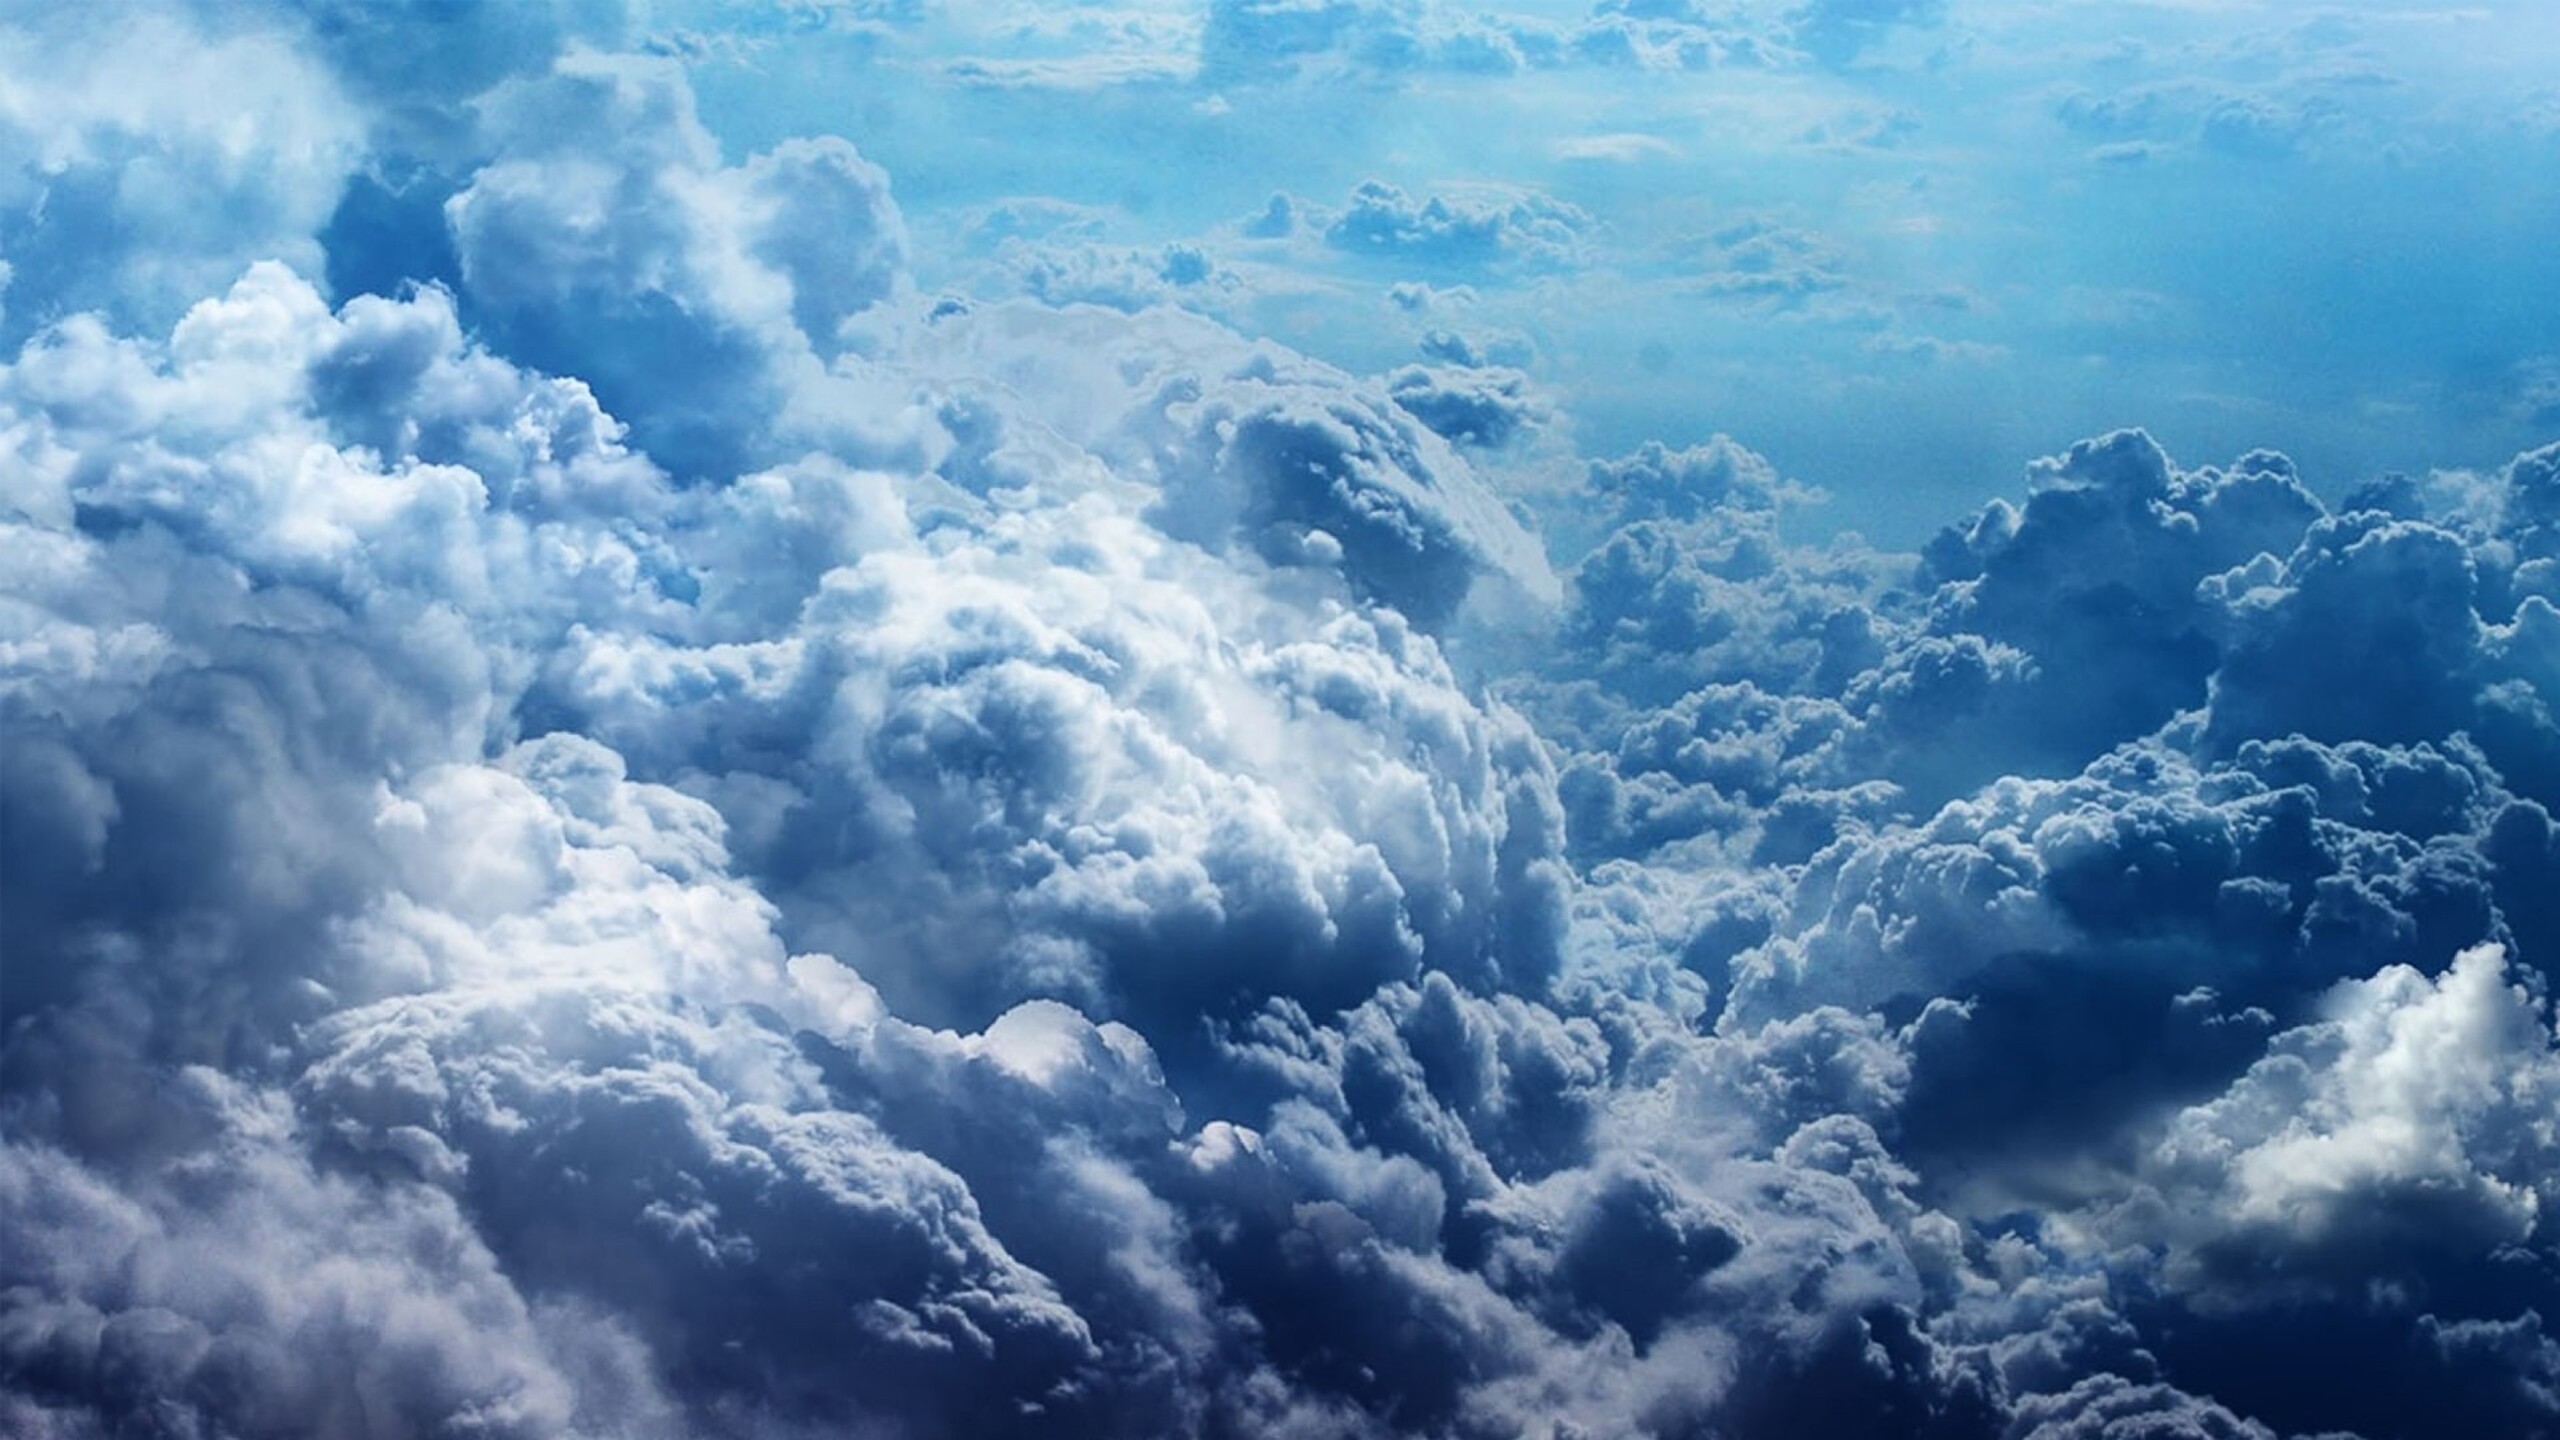 2560x1440 Clouds 1440p Resolution Hd 4k Wallpapers Images Backgrounds Photos And Pictures